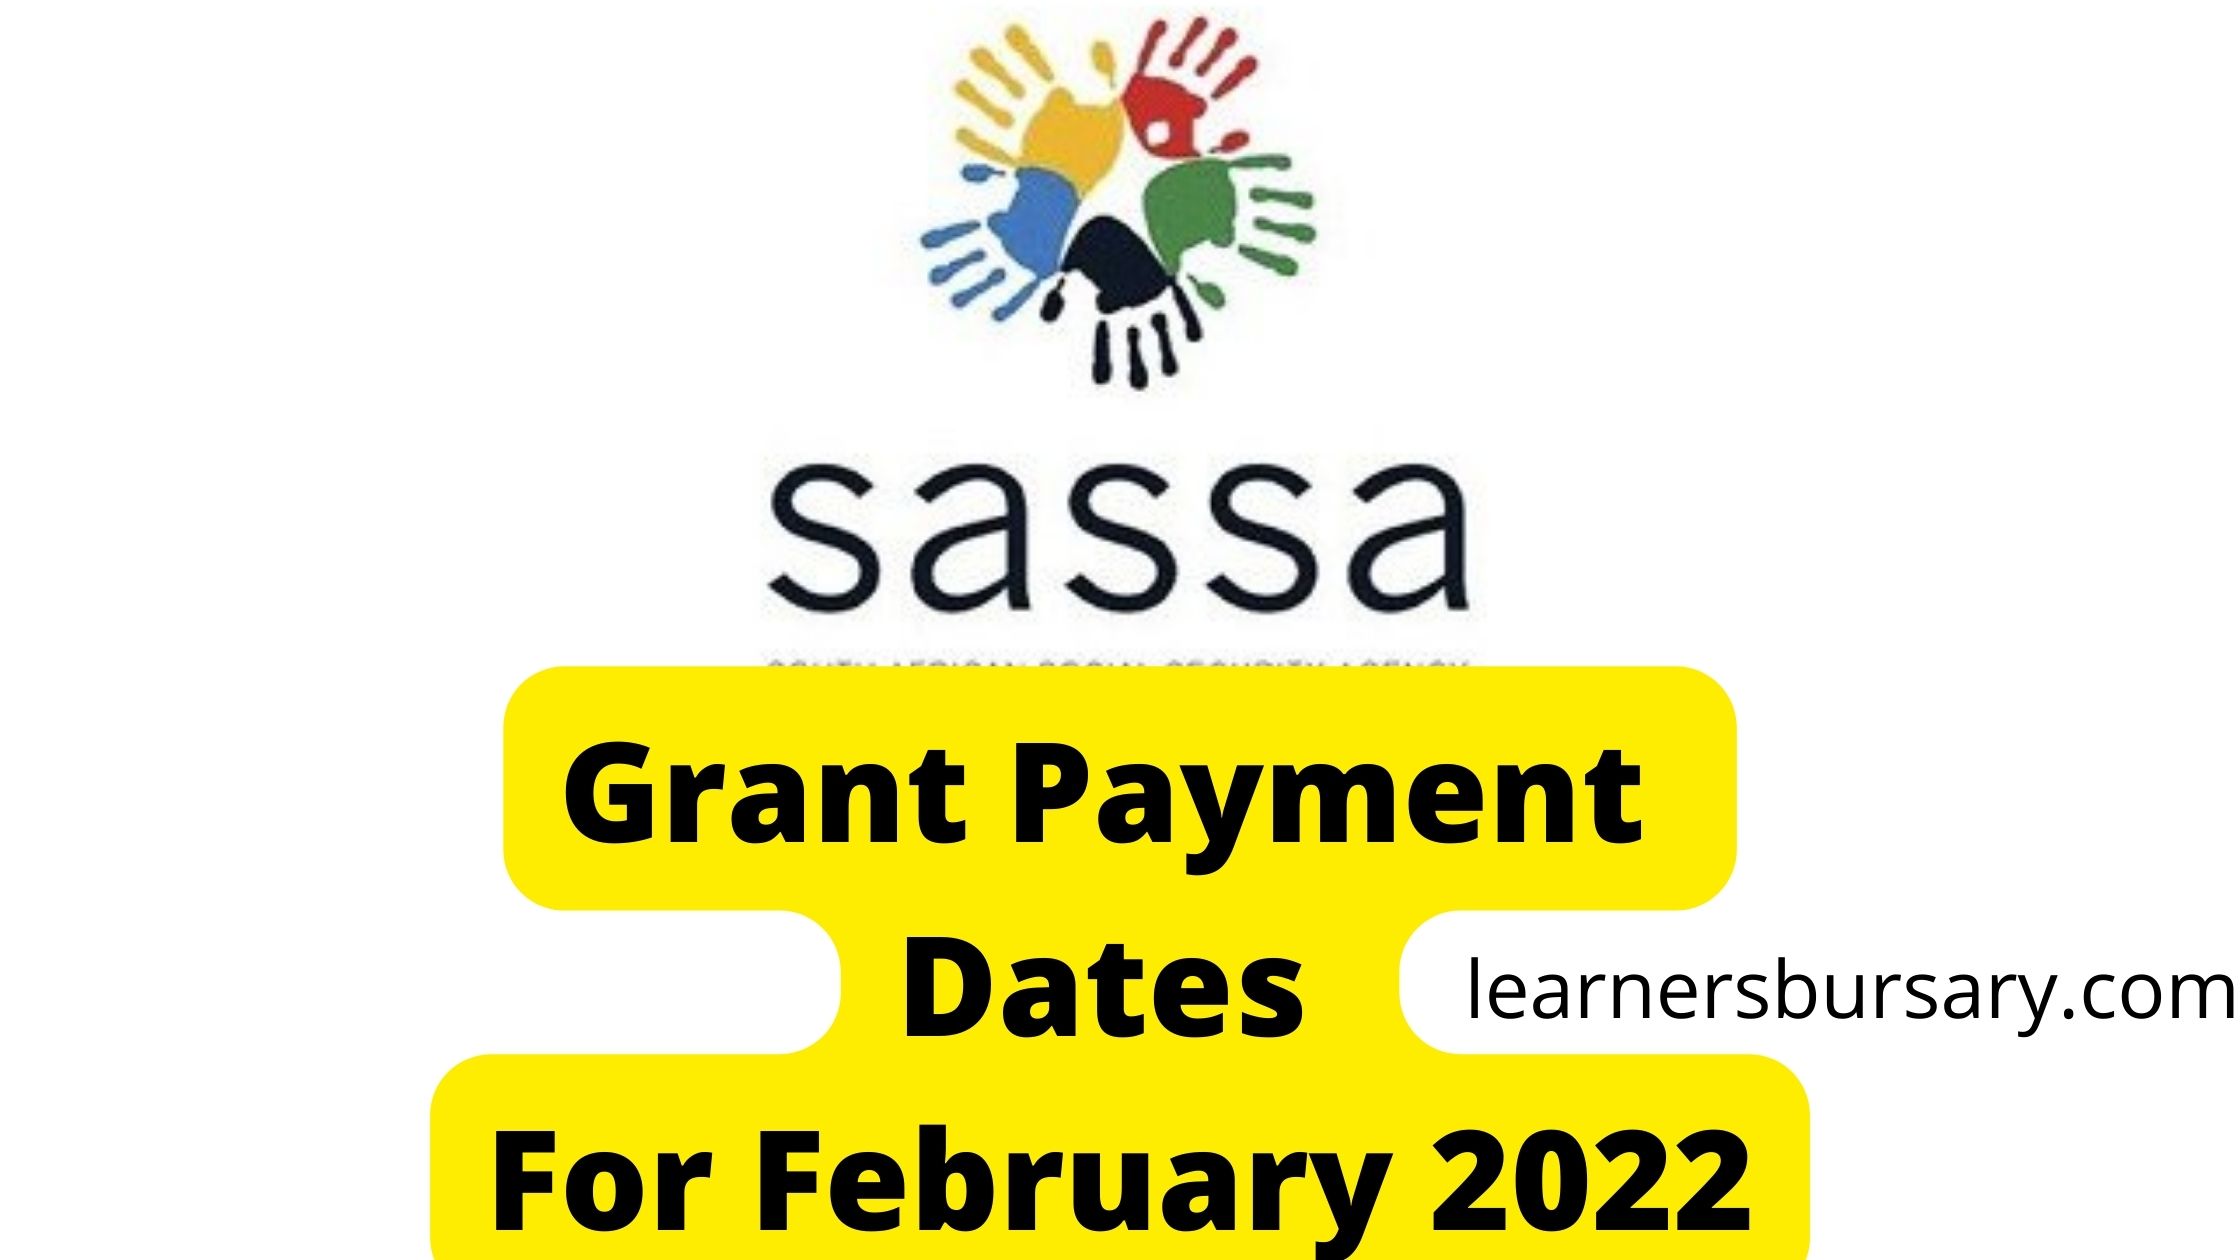 Grant Payment Dates For February 2022